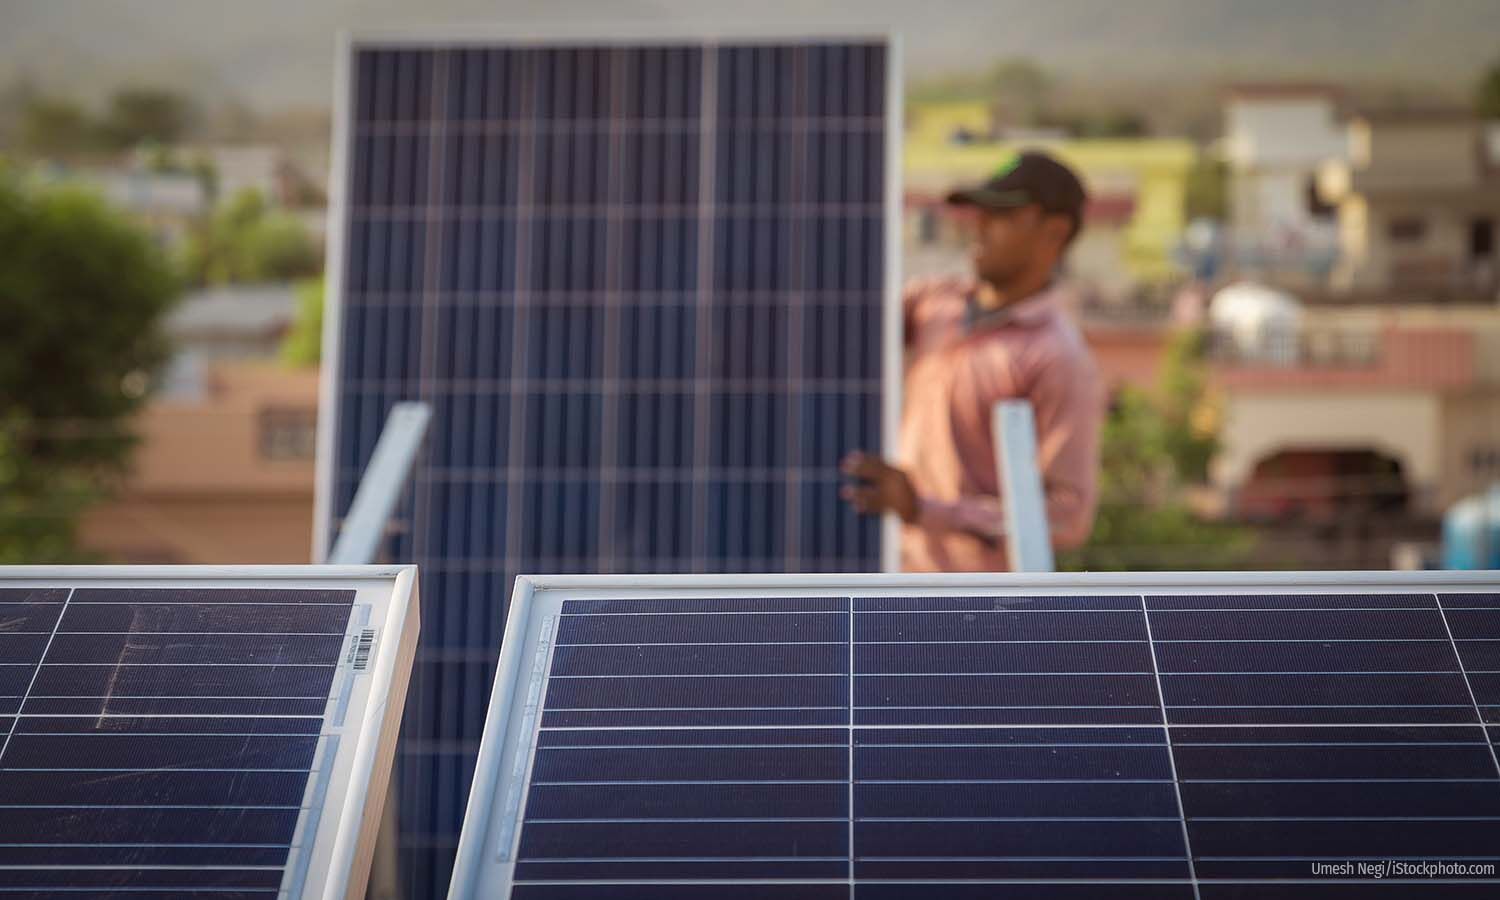 Explained: The Fine-Print In Modi Govt’s Rooftop Solar/Free Electricity Scheme